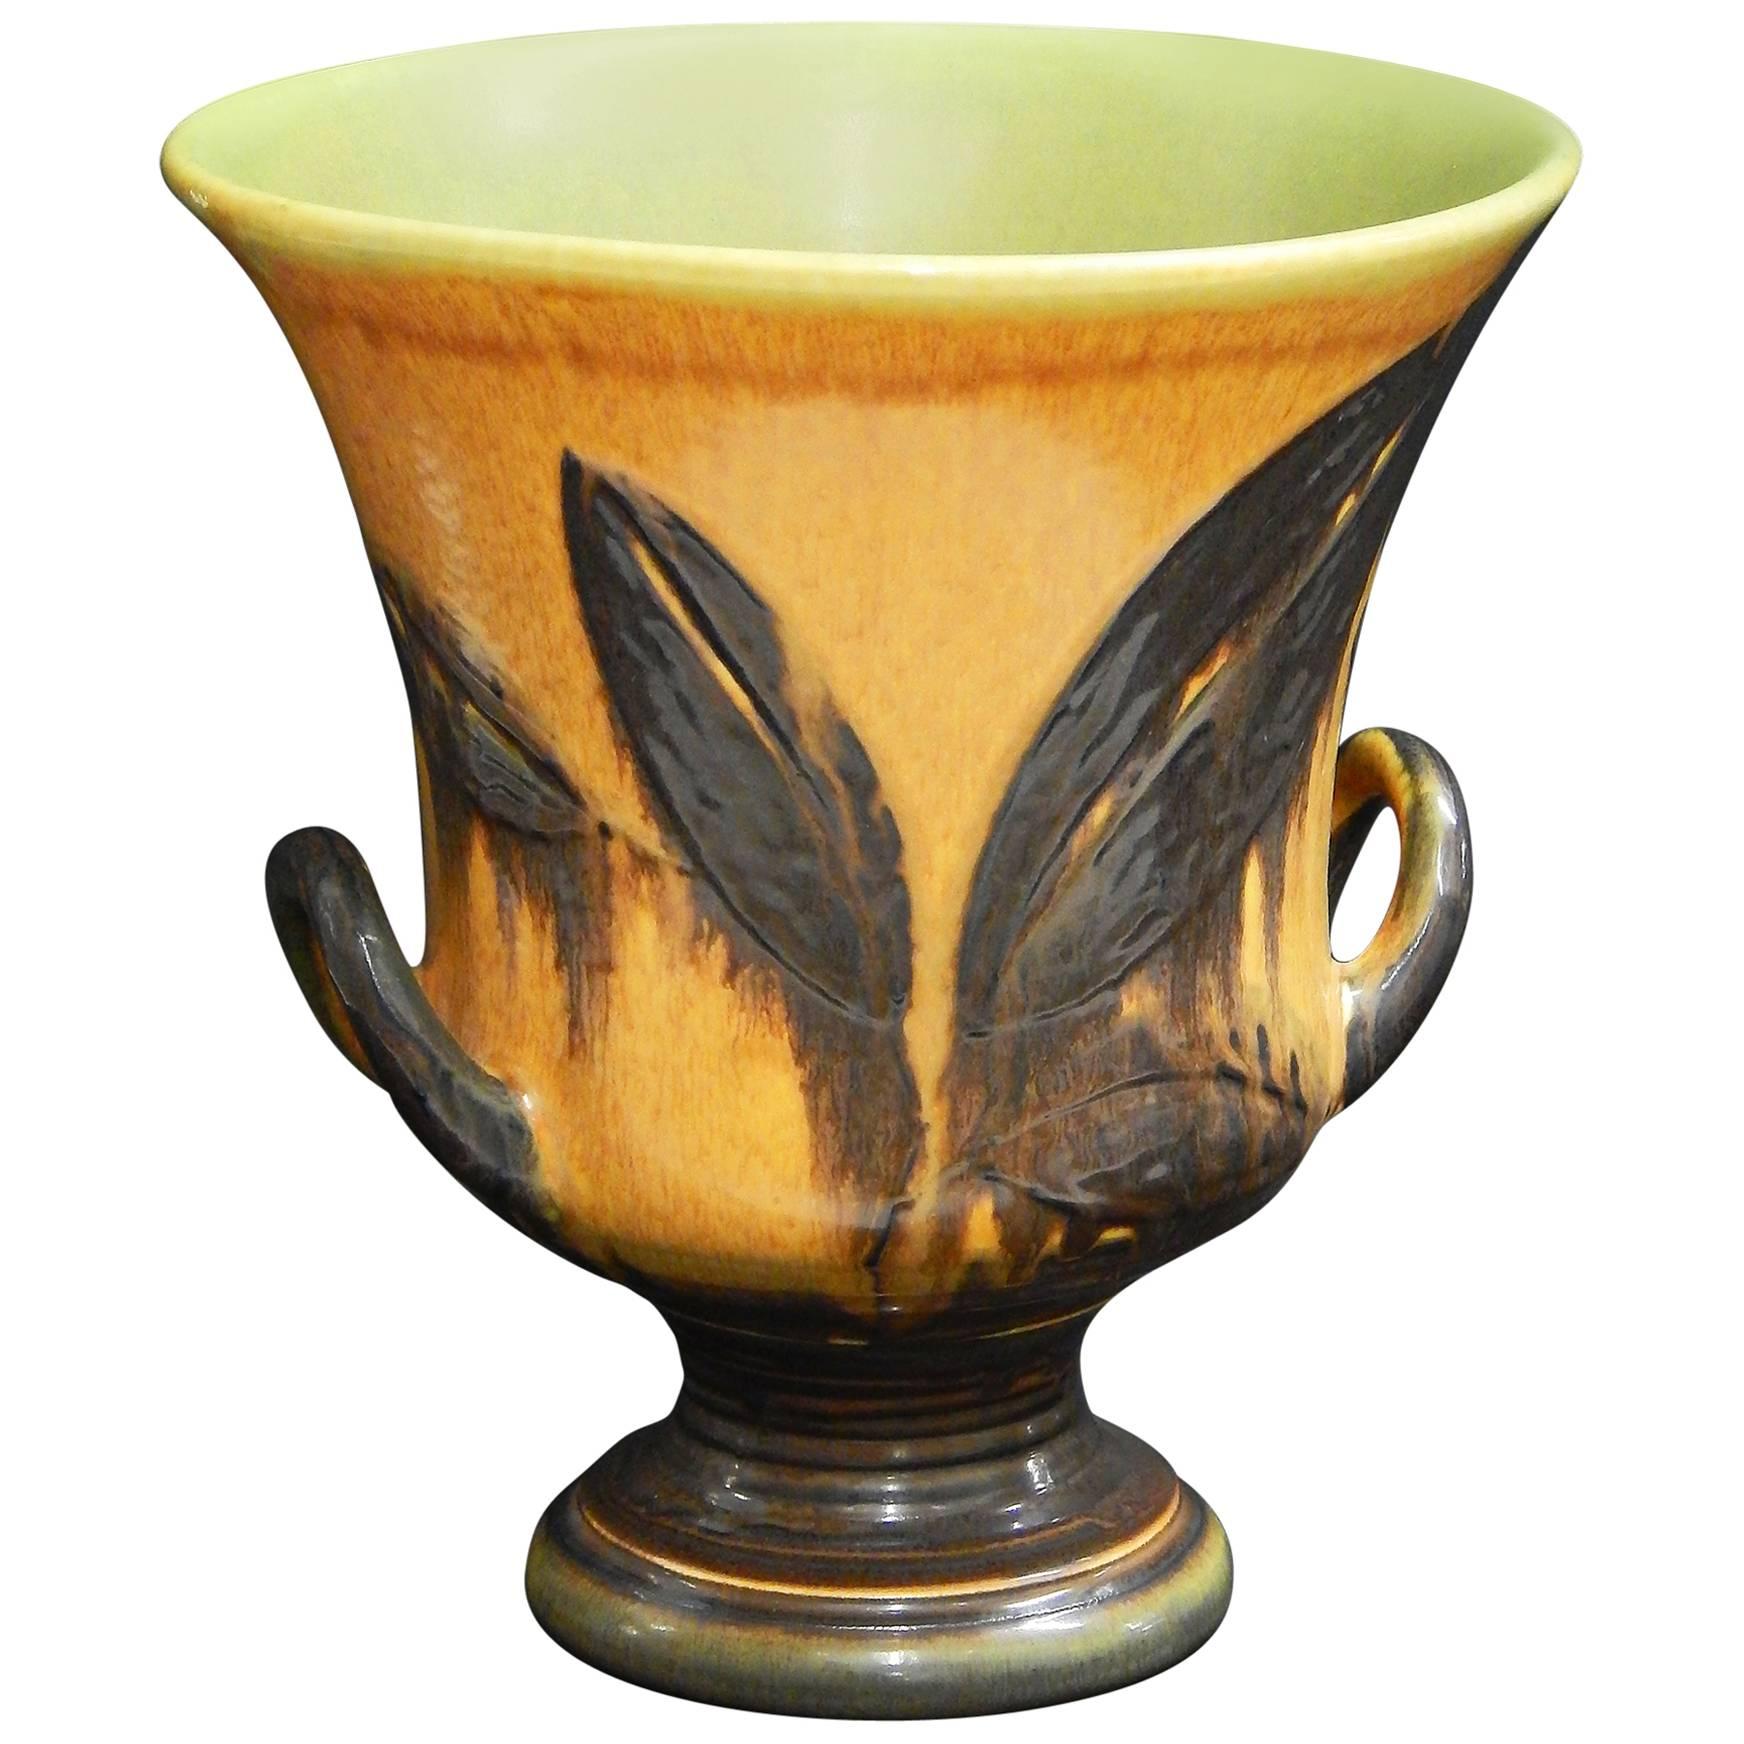 Large, Two-Handled Art Deco Urn with Stylized Leaves, Deep Orange, 1930 For Sale